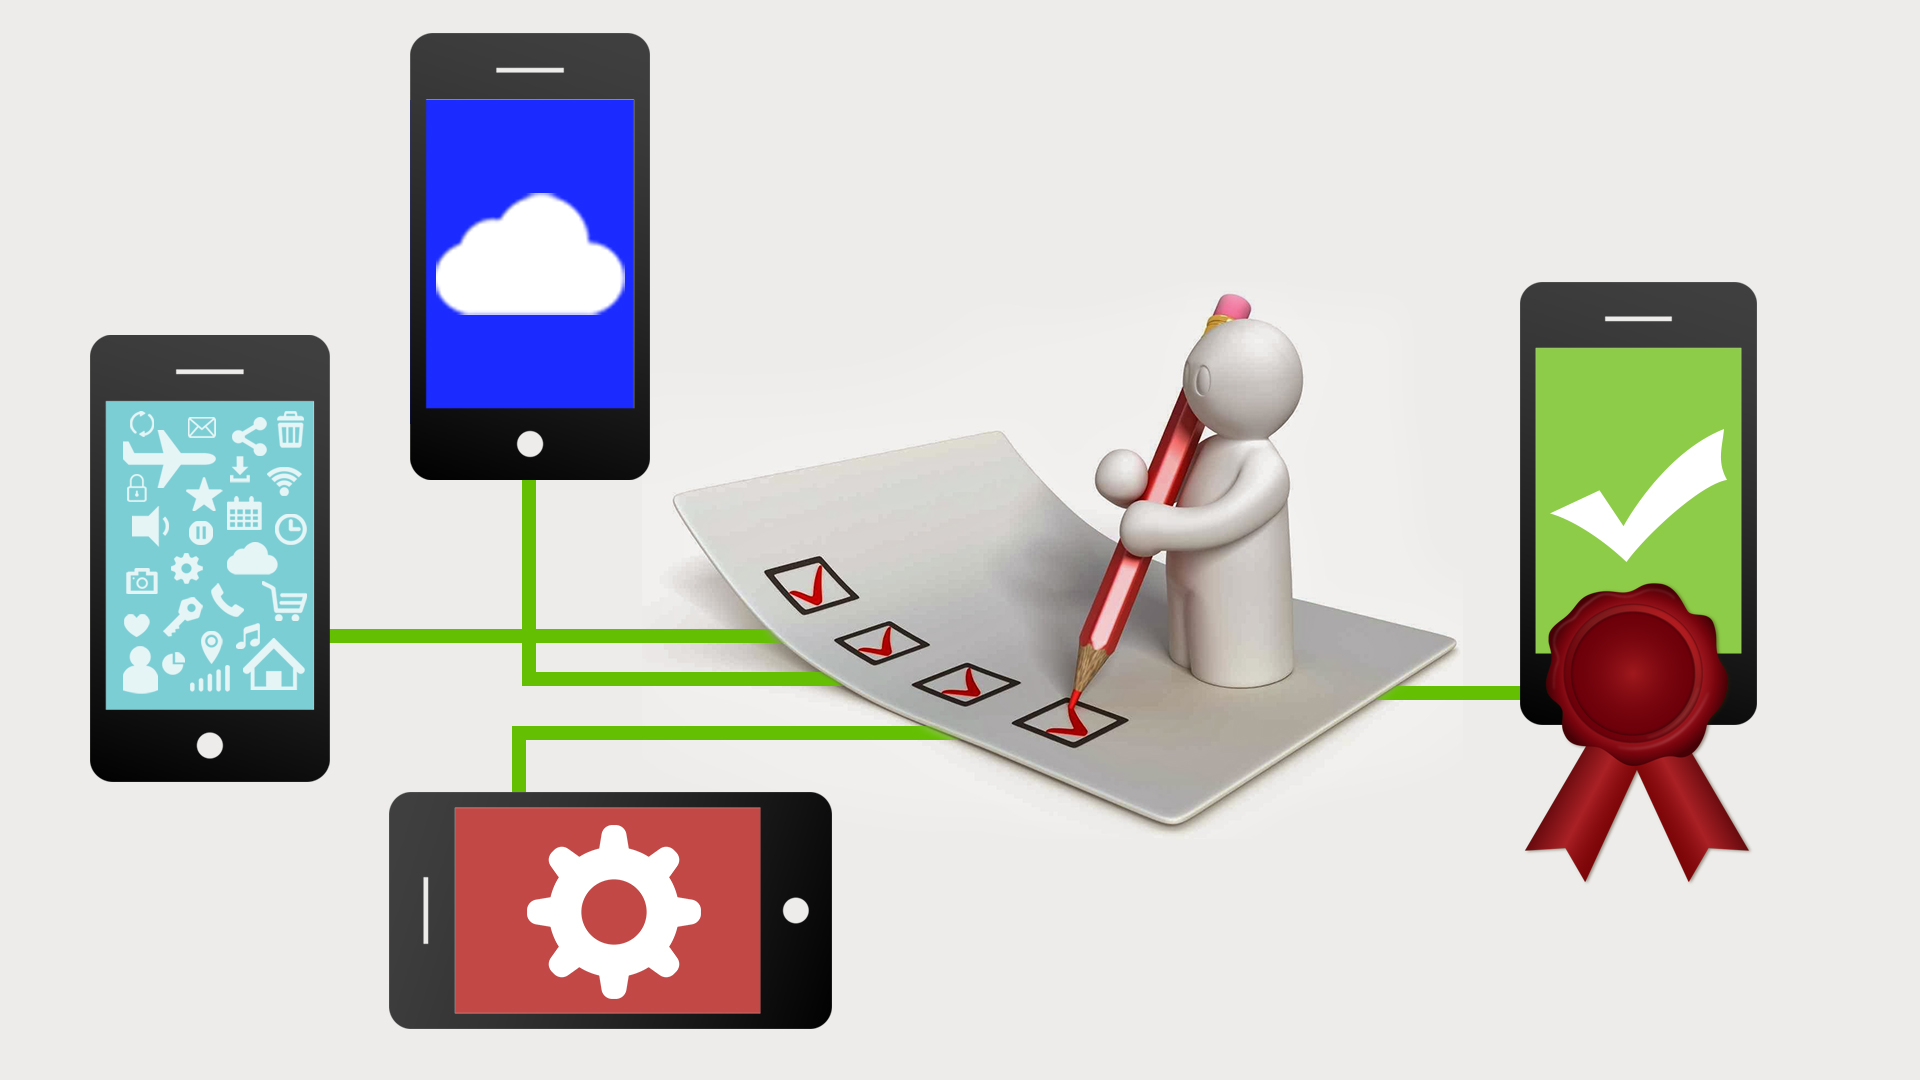 The essence of testing mobile applications